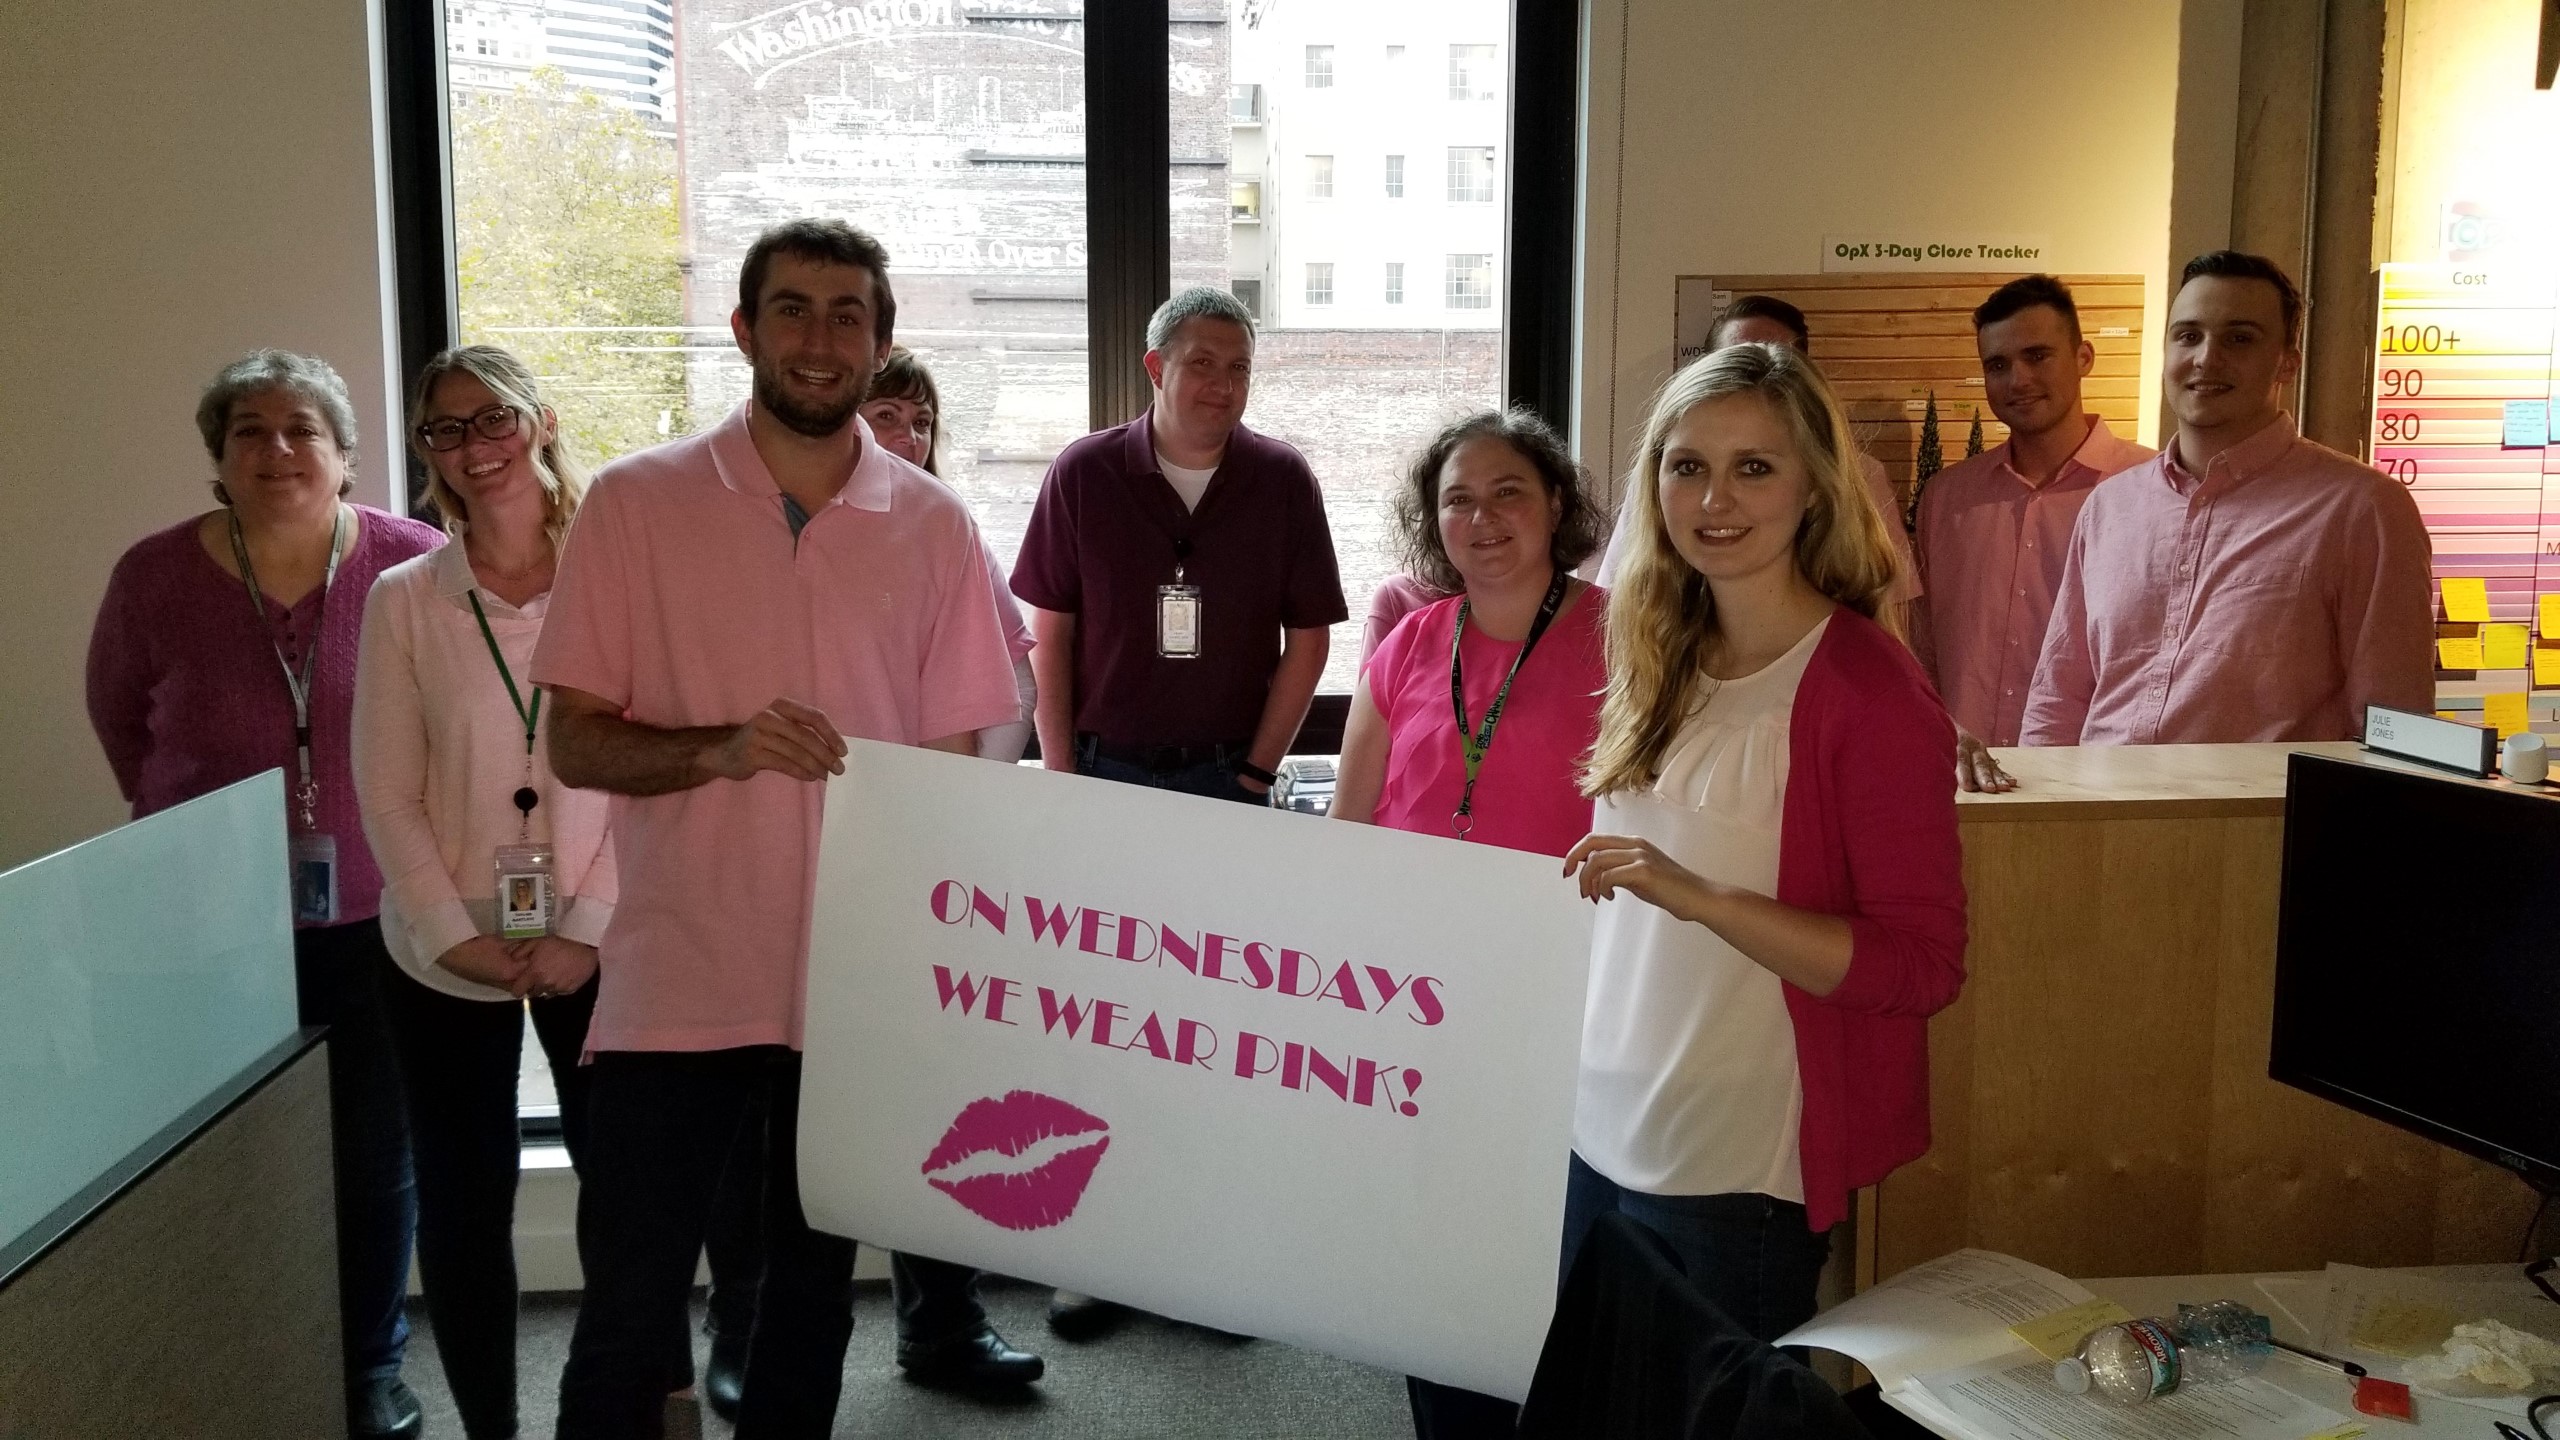 Also in 2018, the Wood Products accounting team dressed up as 'mean girls' from the movie of the same name for Halloween.